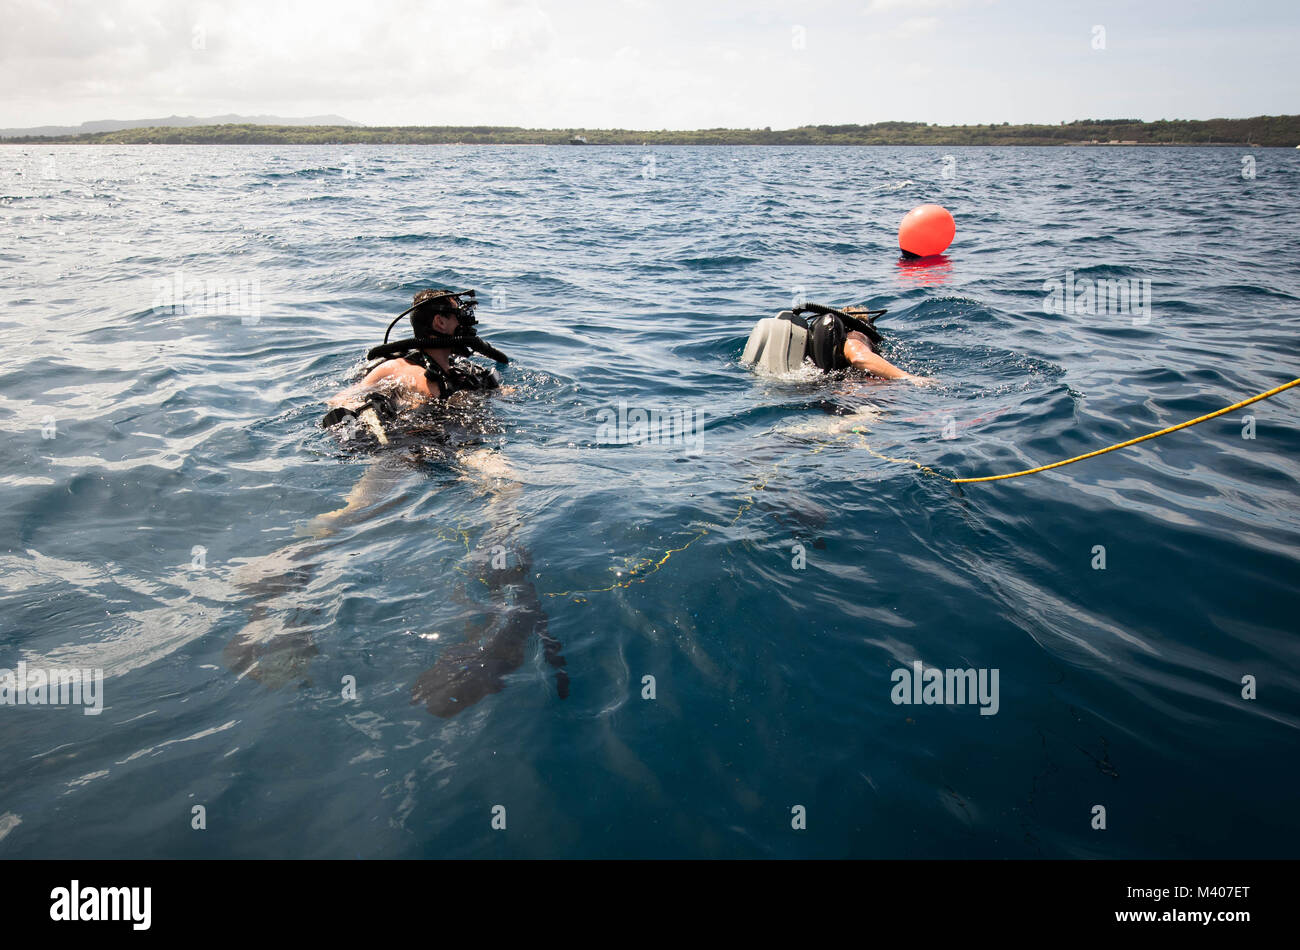 Explosive Ordnance Disposal Technician 3rd Class Jake Ballard and Explosive Ordnance Disposal Technician 3rd Class James Webb, both assigned to Explosive Ordnance Disposal Mobile Unit 5 (EODMU-5), swim to a buoy before diving during underwater mine countermeasures training in Apra Harbor, Guam, Feb. 7, 2018.EODMU5 conducts counter IED operations, renders safe explosive hazards and disarms underwater explosives. EODMU-5 is assigned to Commander, Task Force 75, the primary expeditionary task force responsible for the planning and execution of coastal riverine operations, explosive ordnance dispo Stock Photo